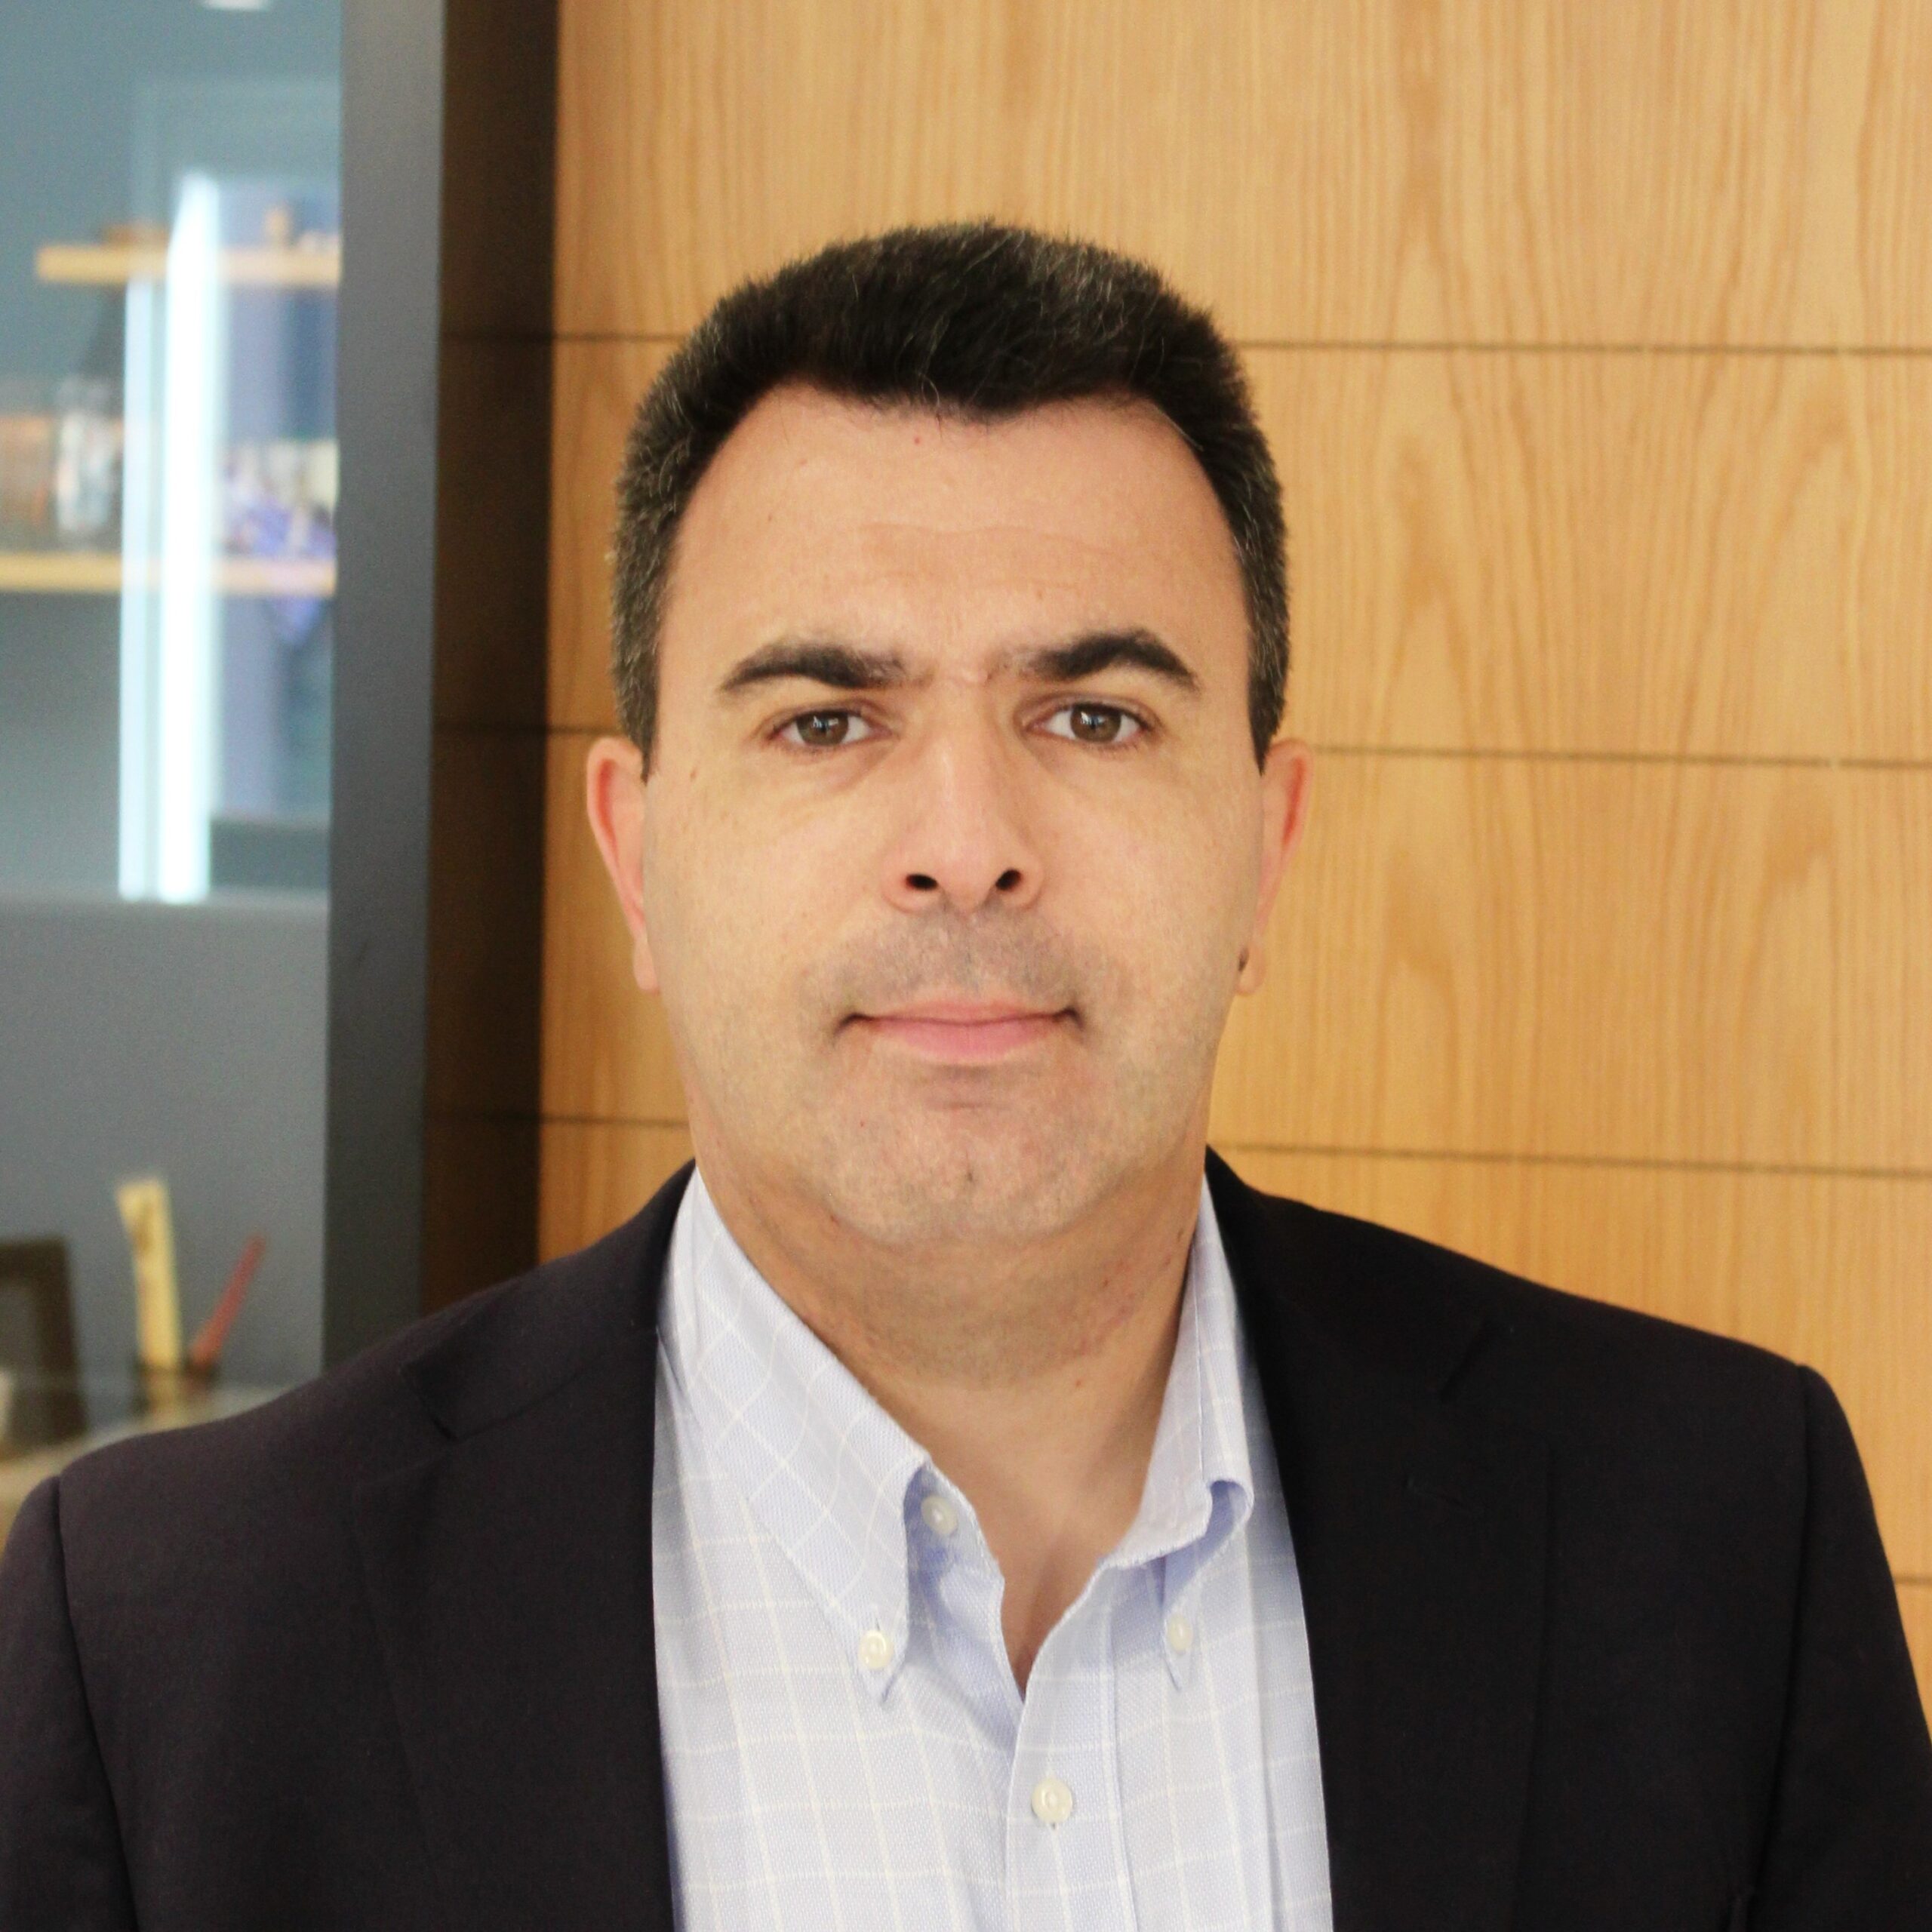 Avedis Seferian, the CEO and President of WRAP